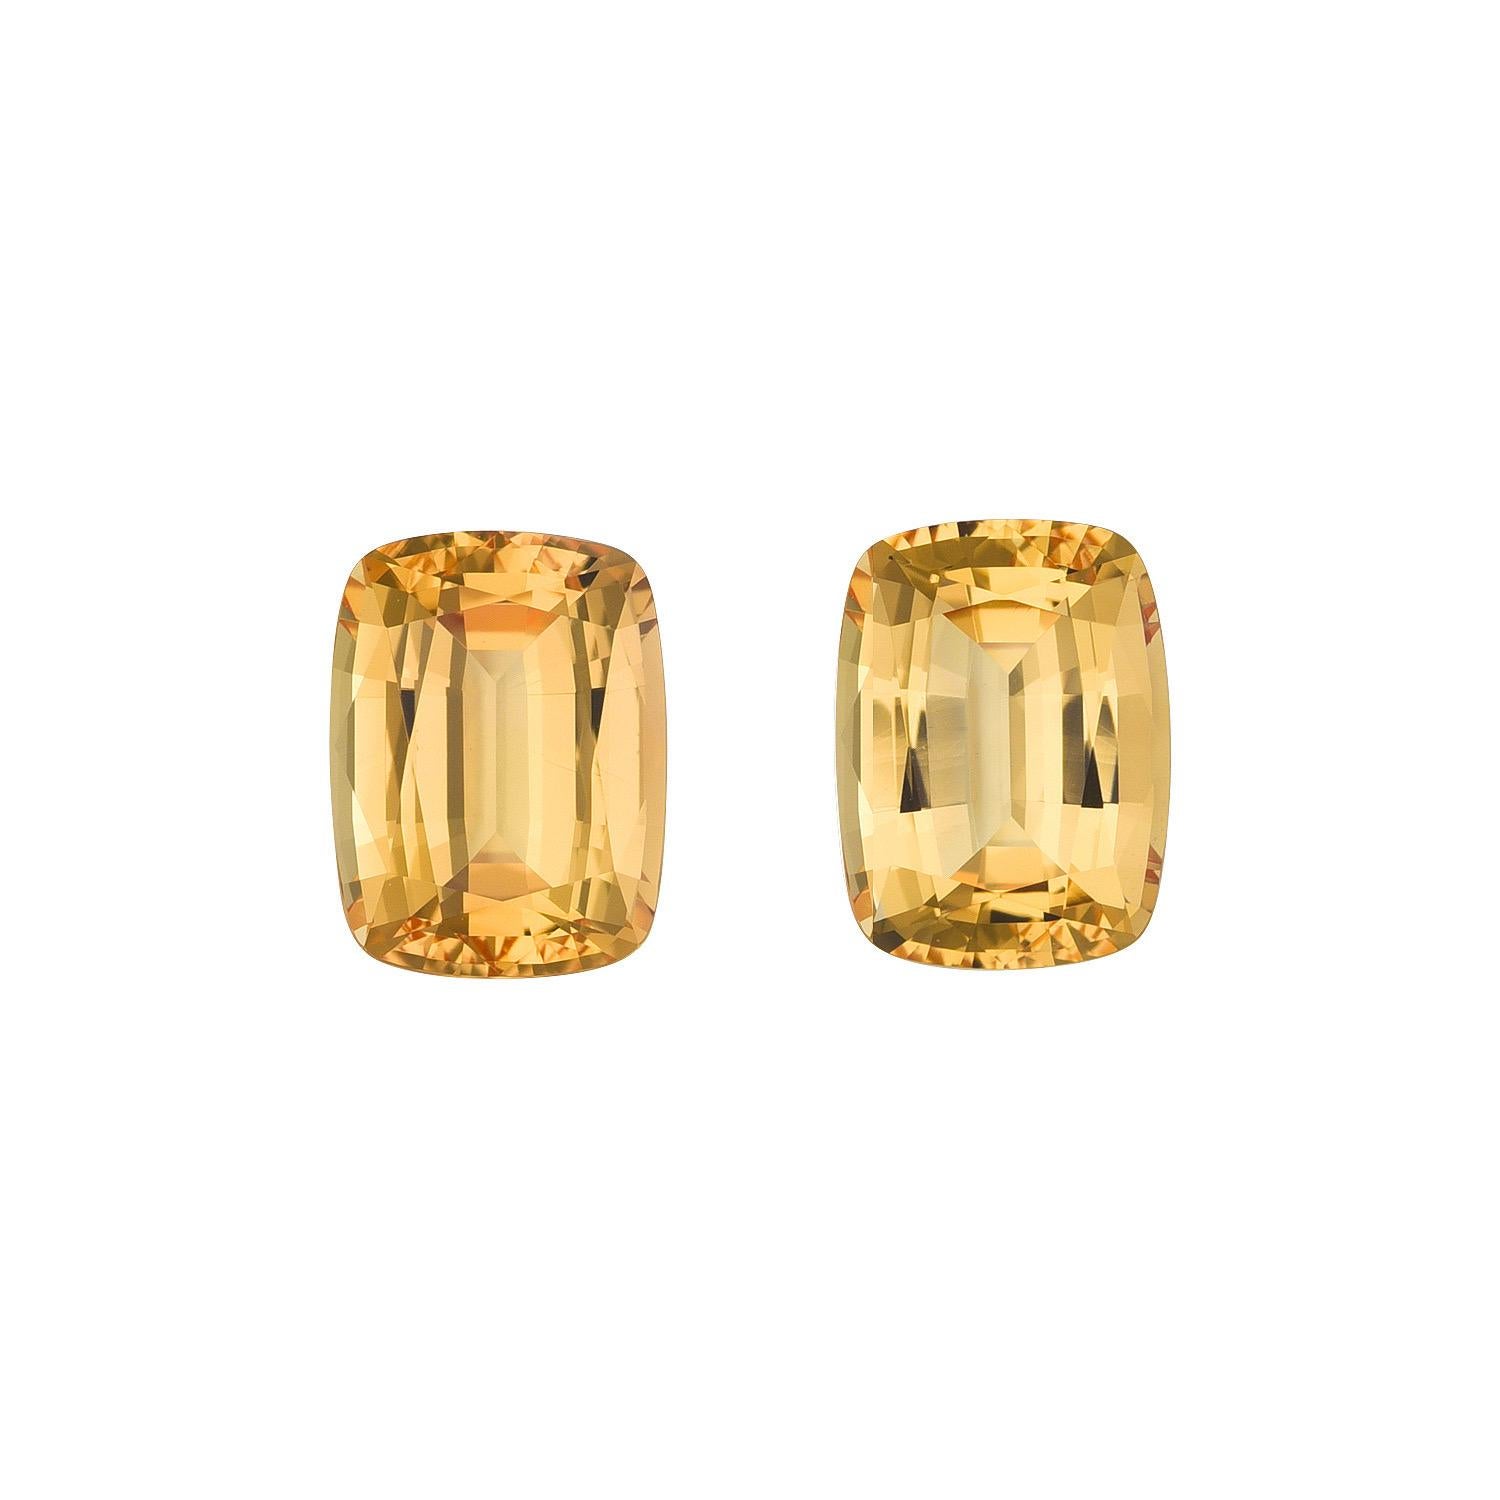 Cushion Cut Imperial Topaz Earrings Loose Gemstones 3.36 Carat Unmounted Cushions For Sale